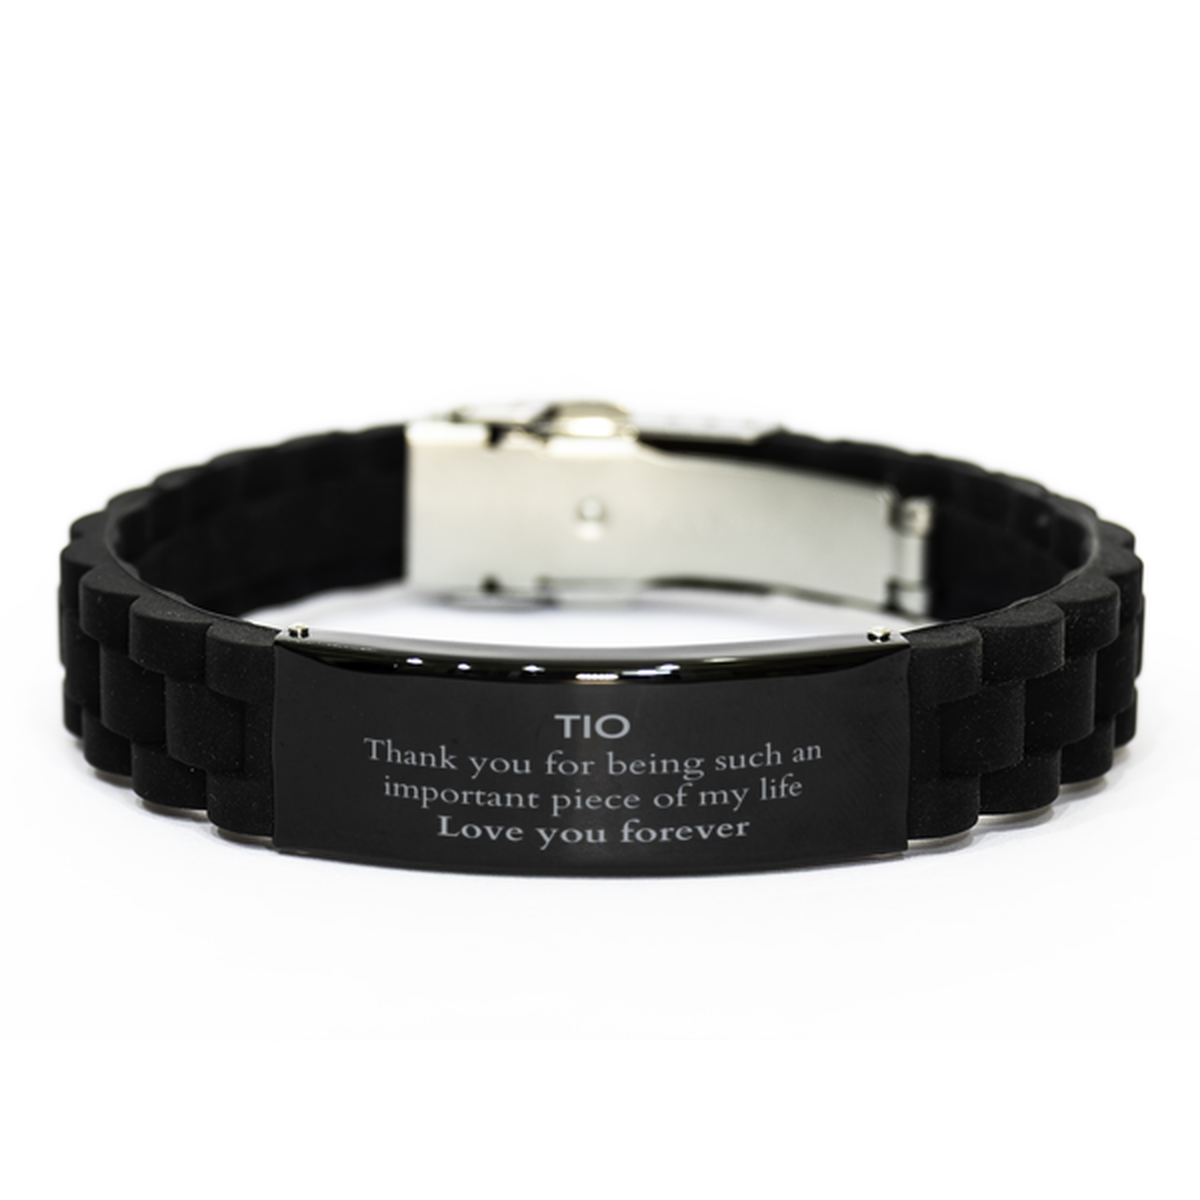 Appropriate Tio Black Glidelock Clasp Bracelet Epic Birthday Gifts for Tio Thank you for being such an important piece of my life Tio Christmas Mothers Fathers Day